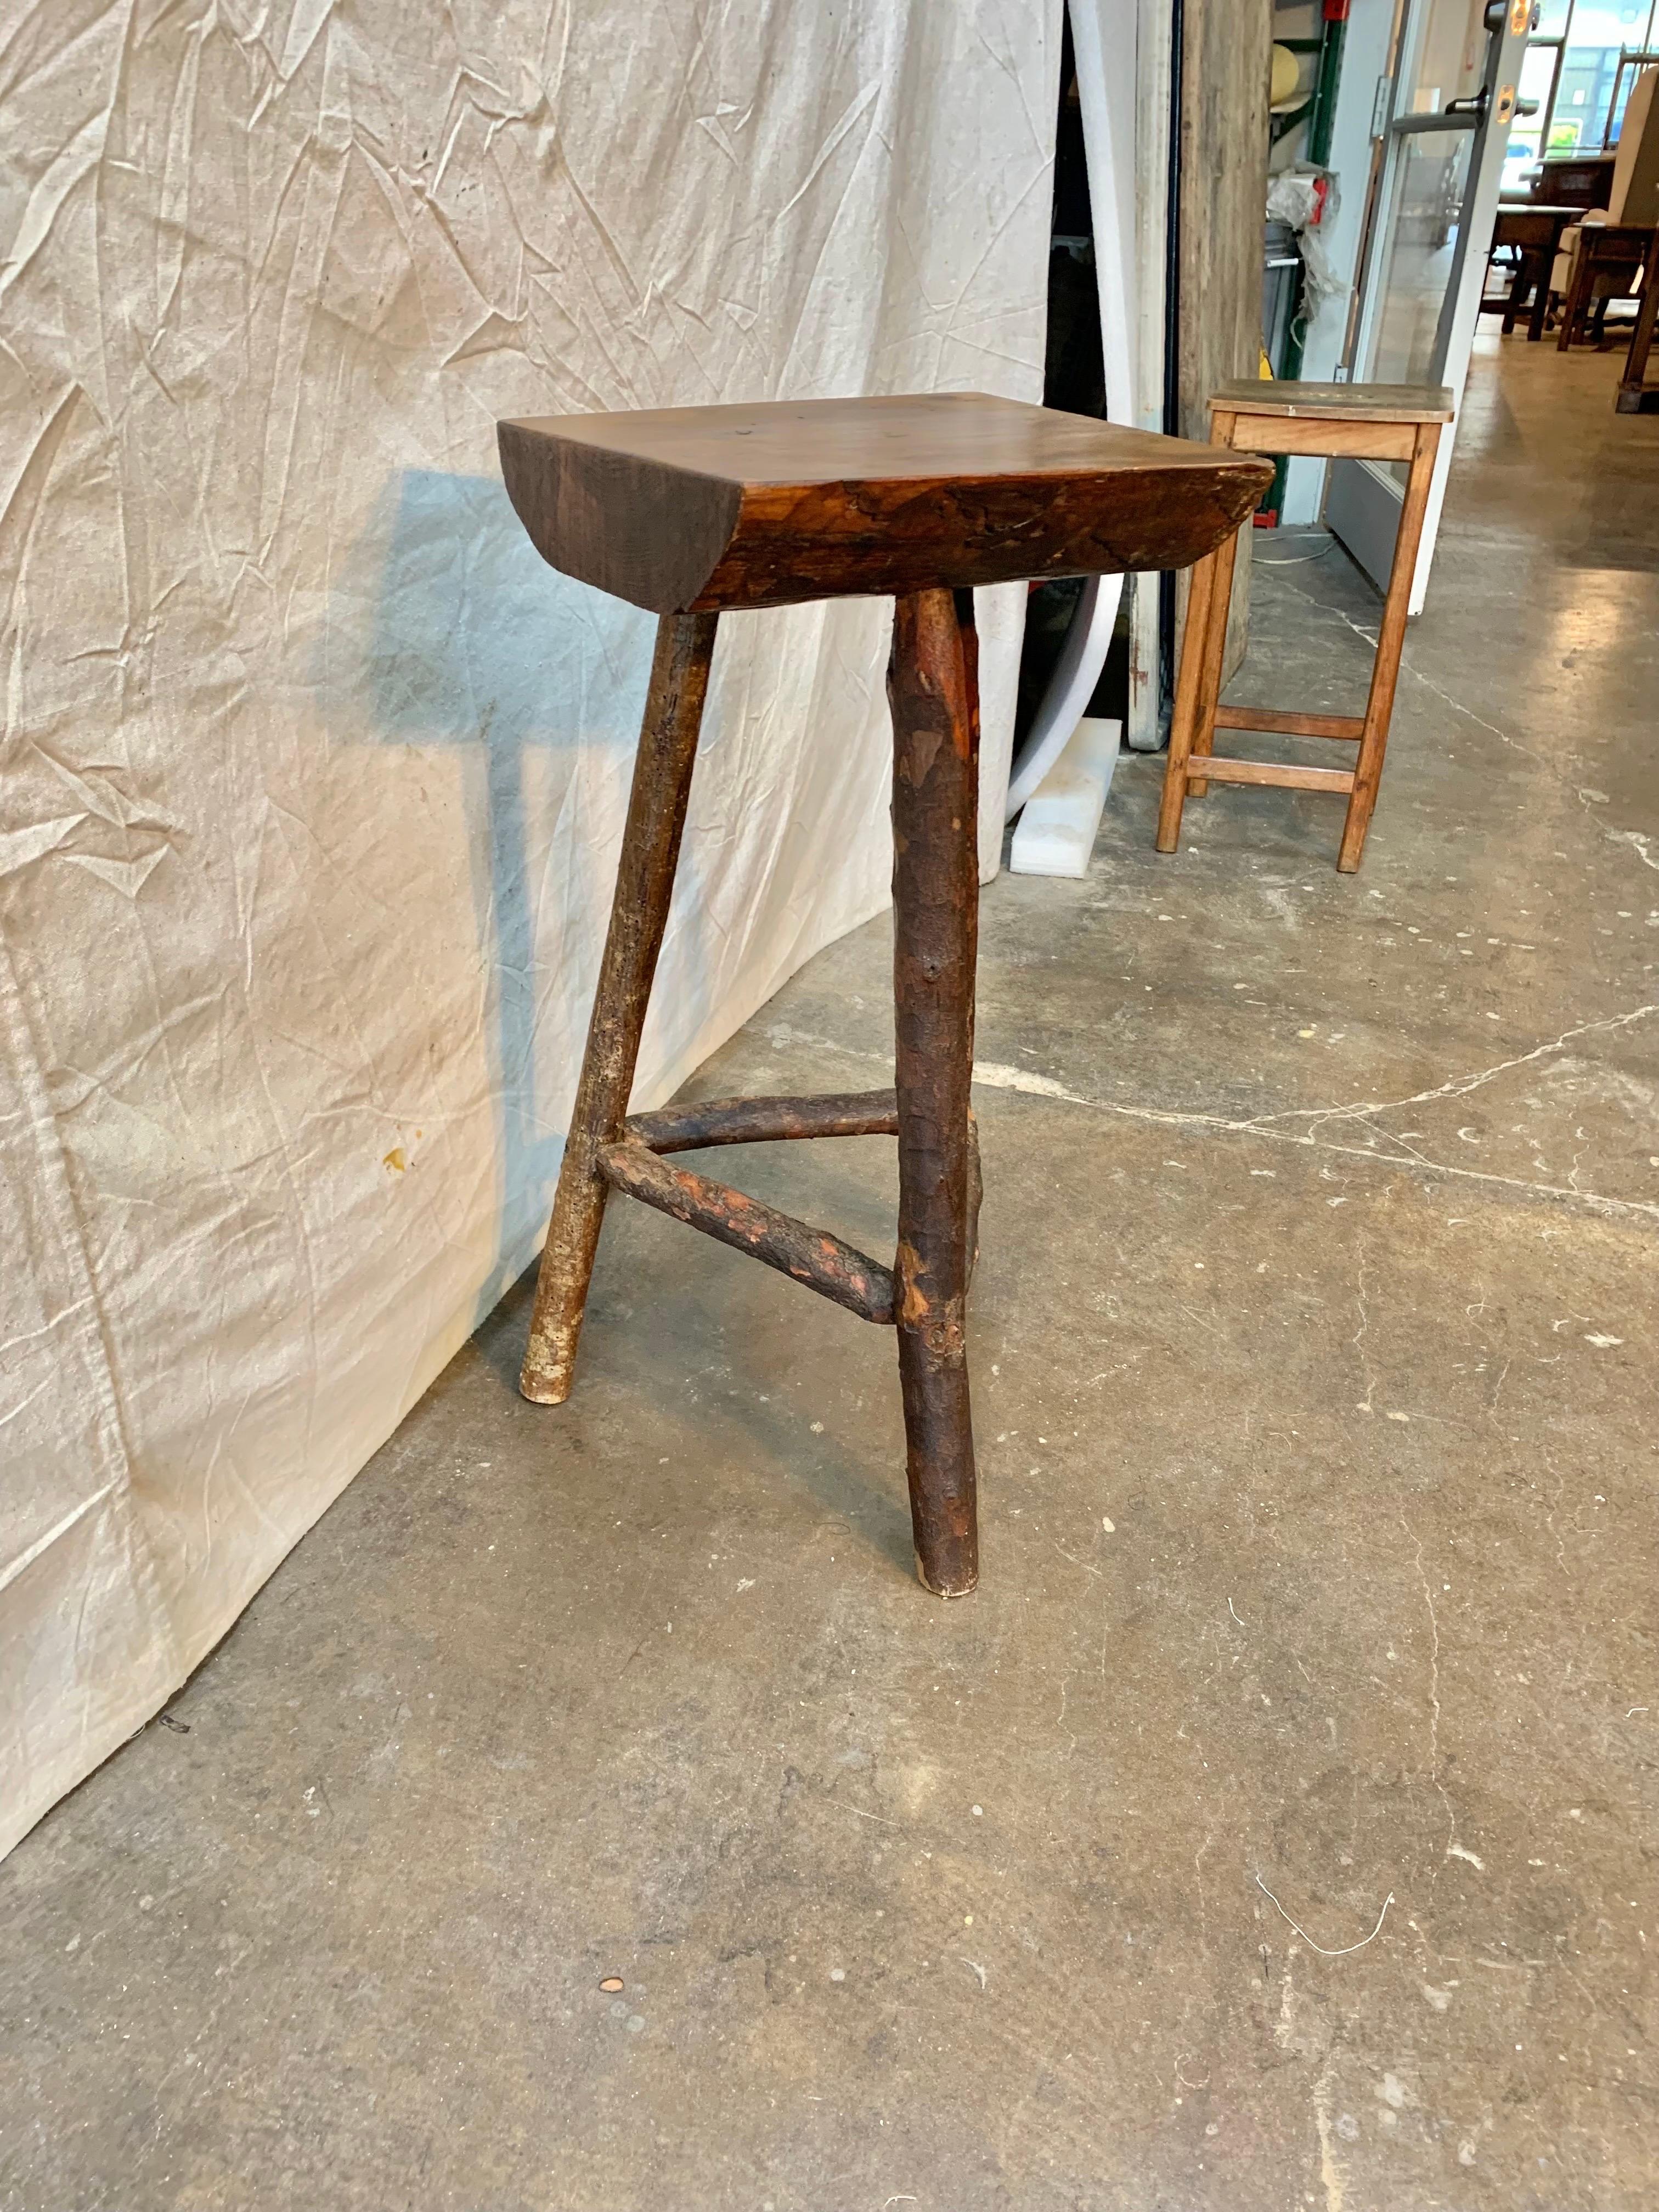 Found in the South of France, this rustic stool or side table was hand crafted using a natural pine tree trunk and branches and dates to the late 1800's. Whether you are decorating a midcentury home, a mountain cabin or a more traditional interior,